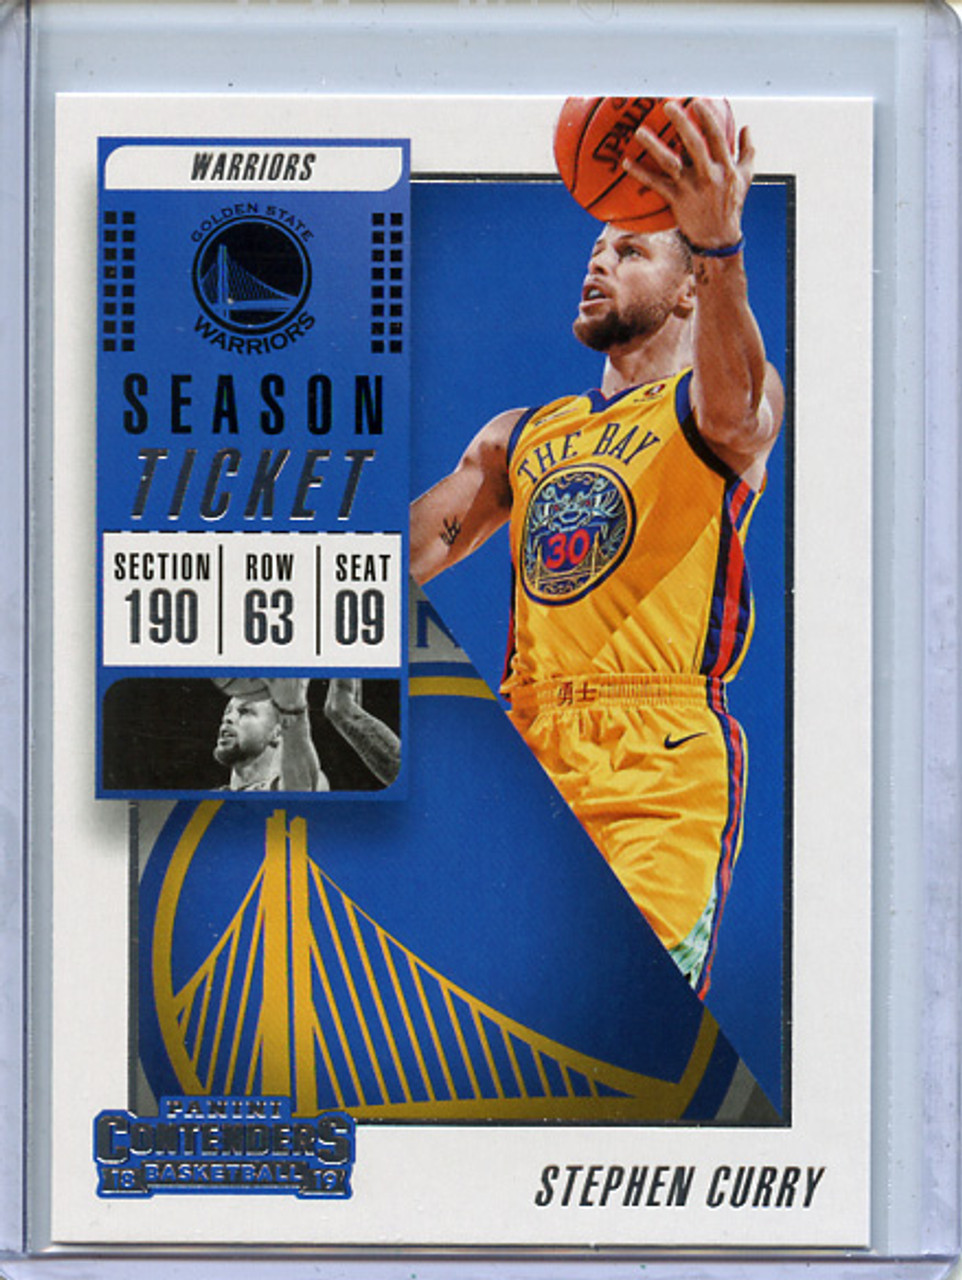 Stephen Curry 2018-19 Contenders #86